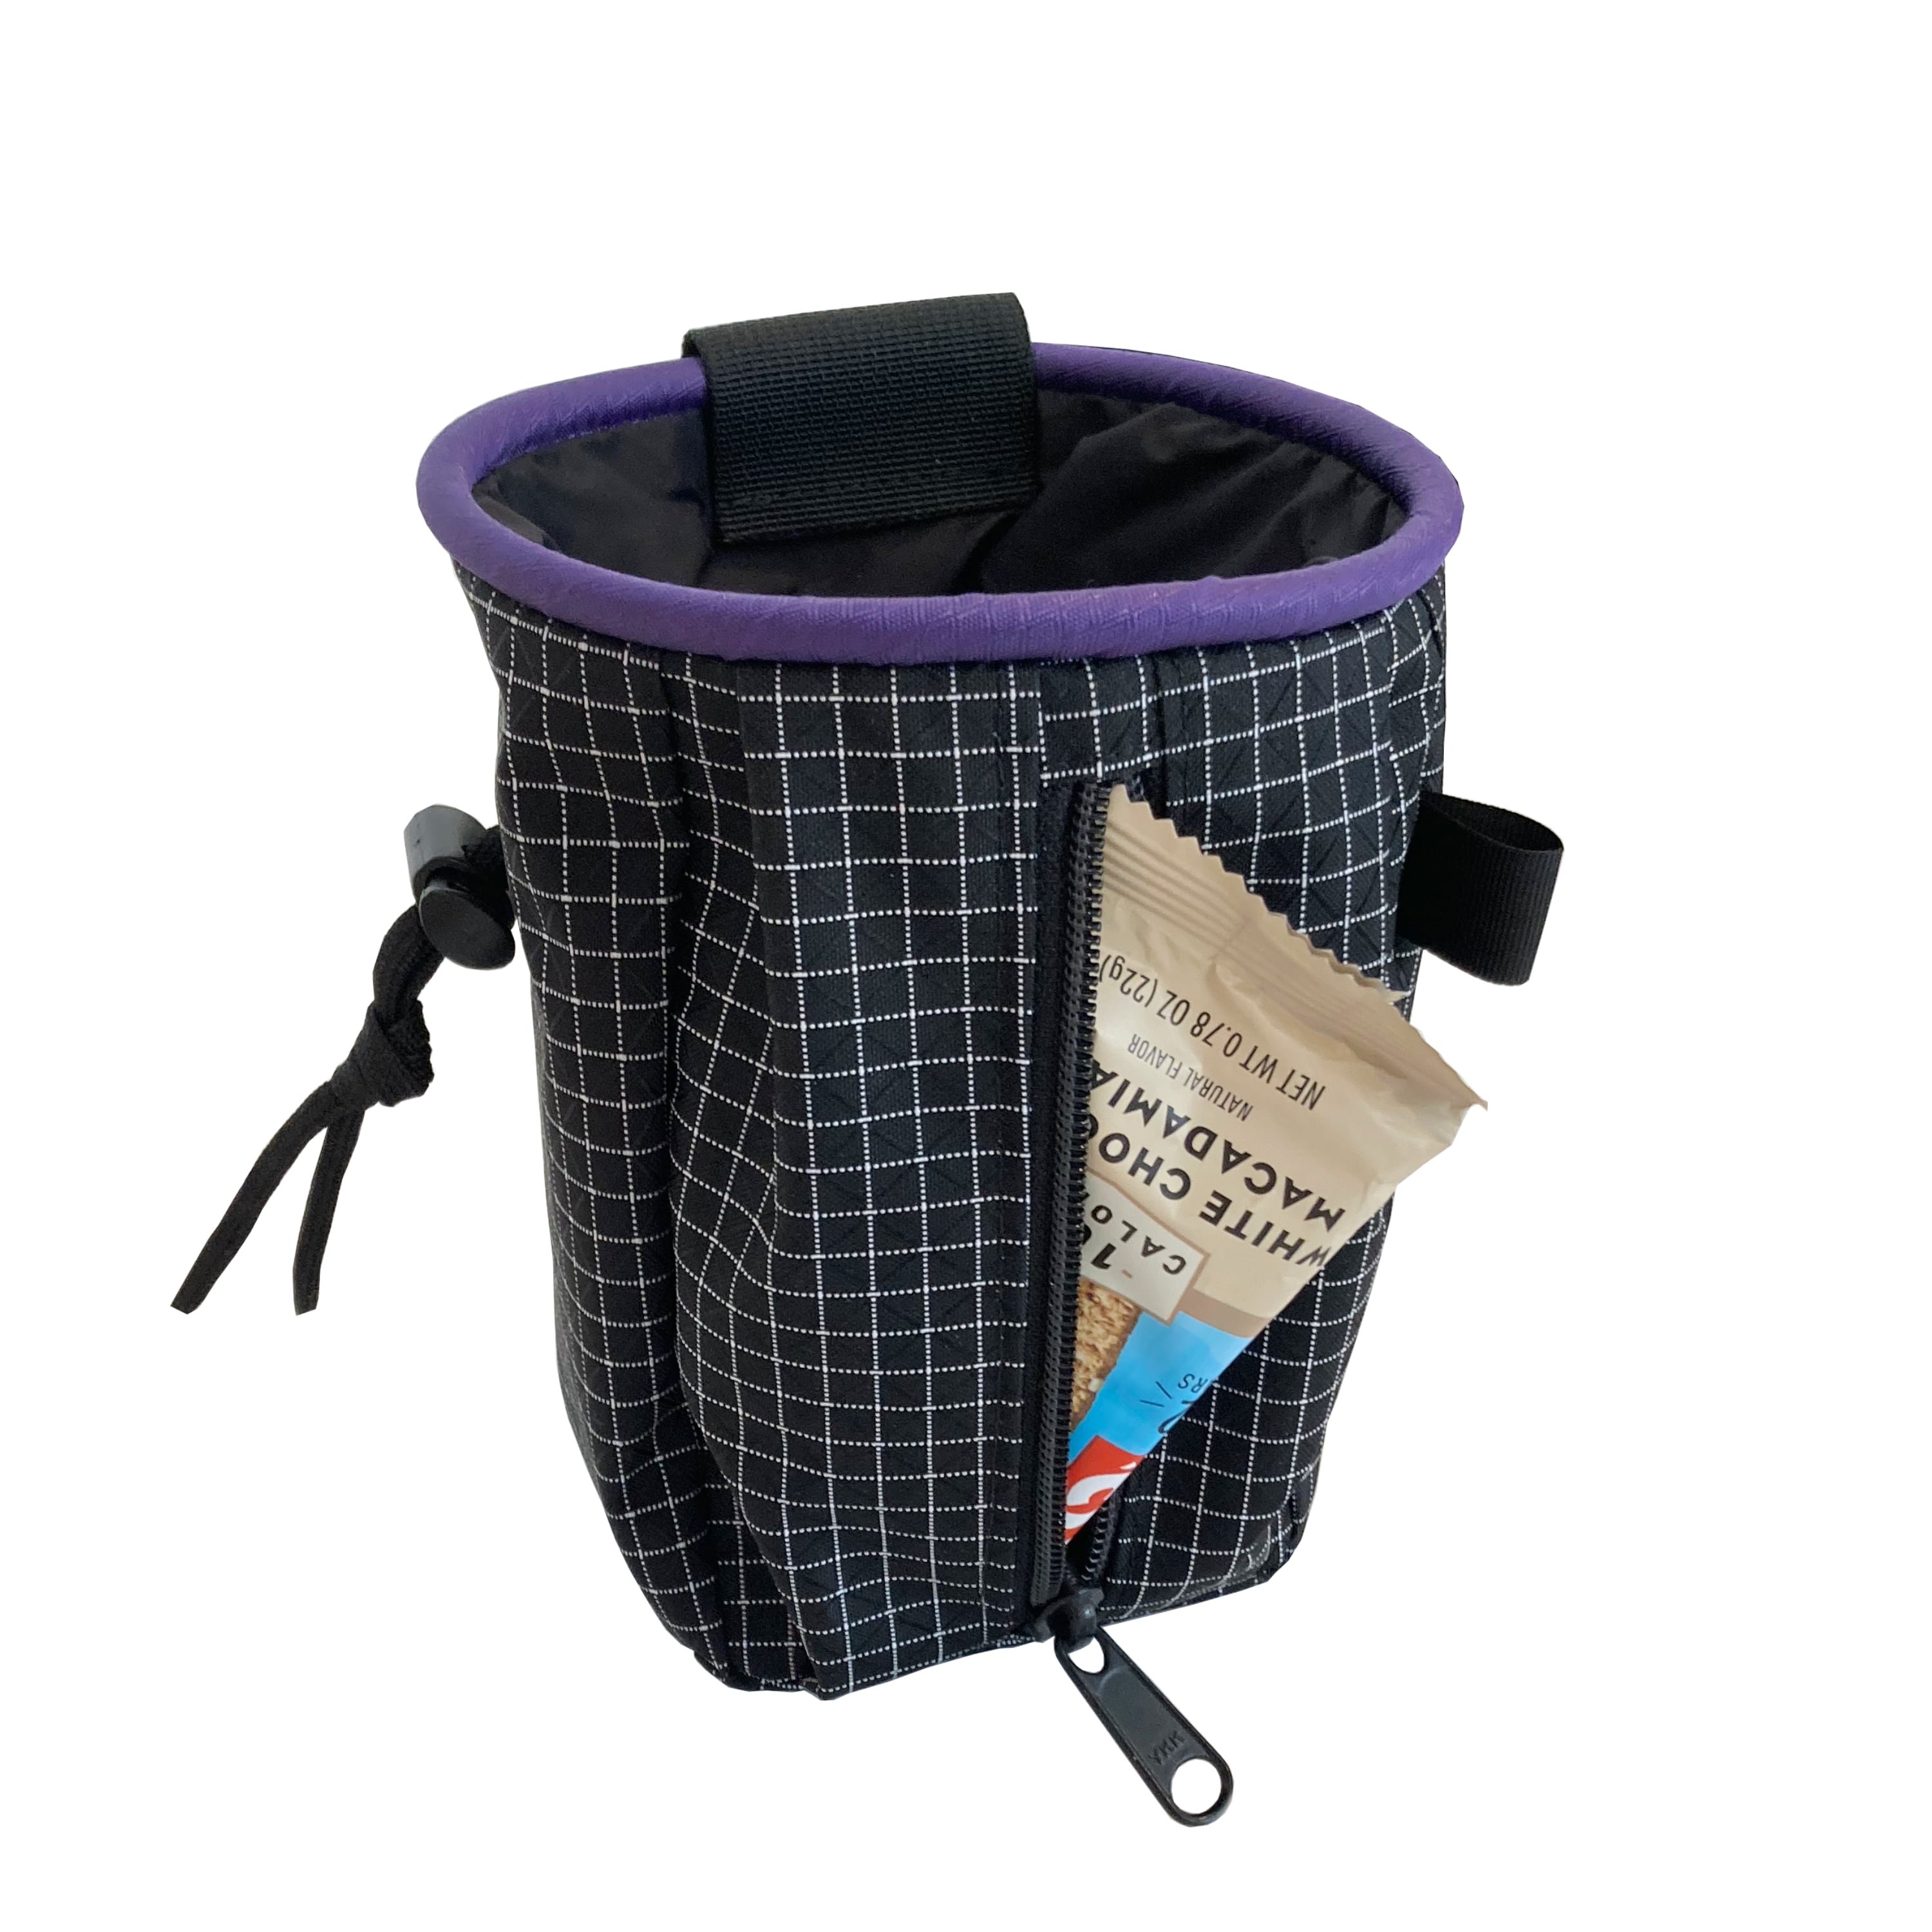 DIY Kit for a chalk bag used for rock climbing